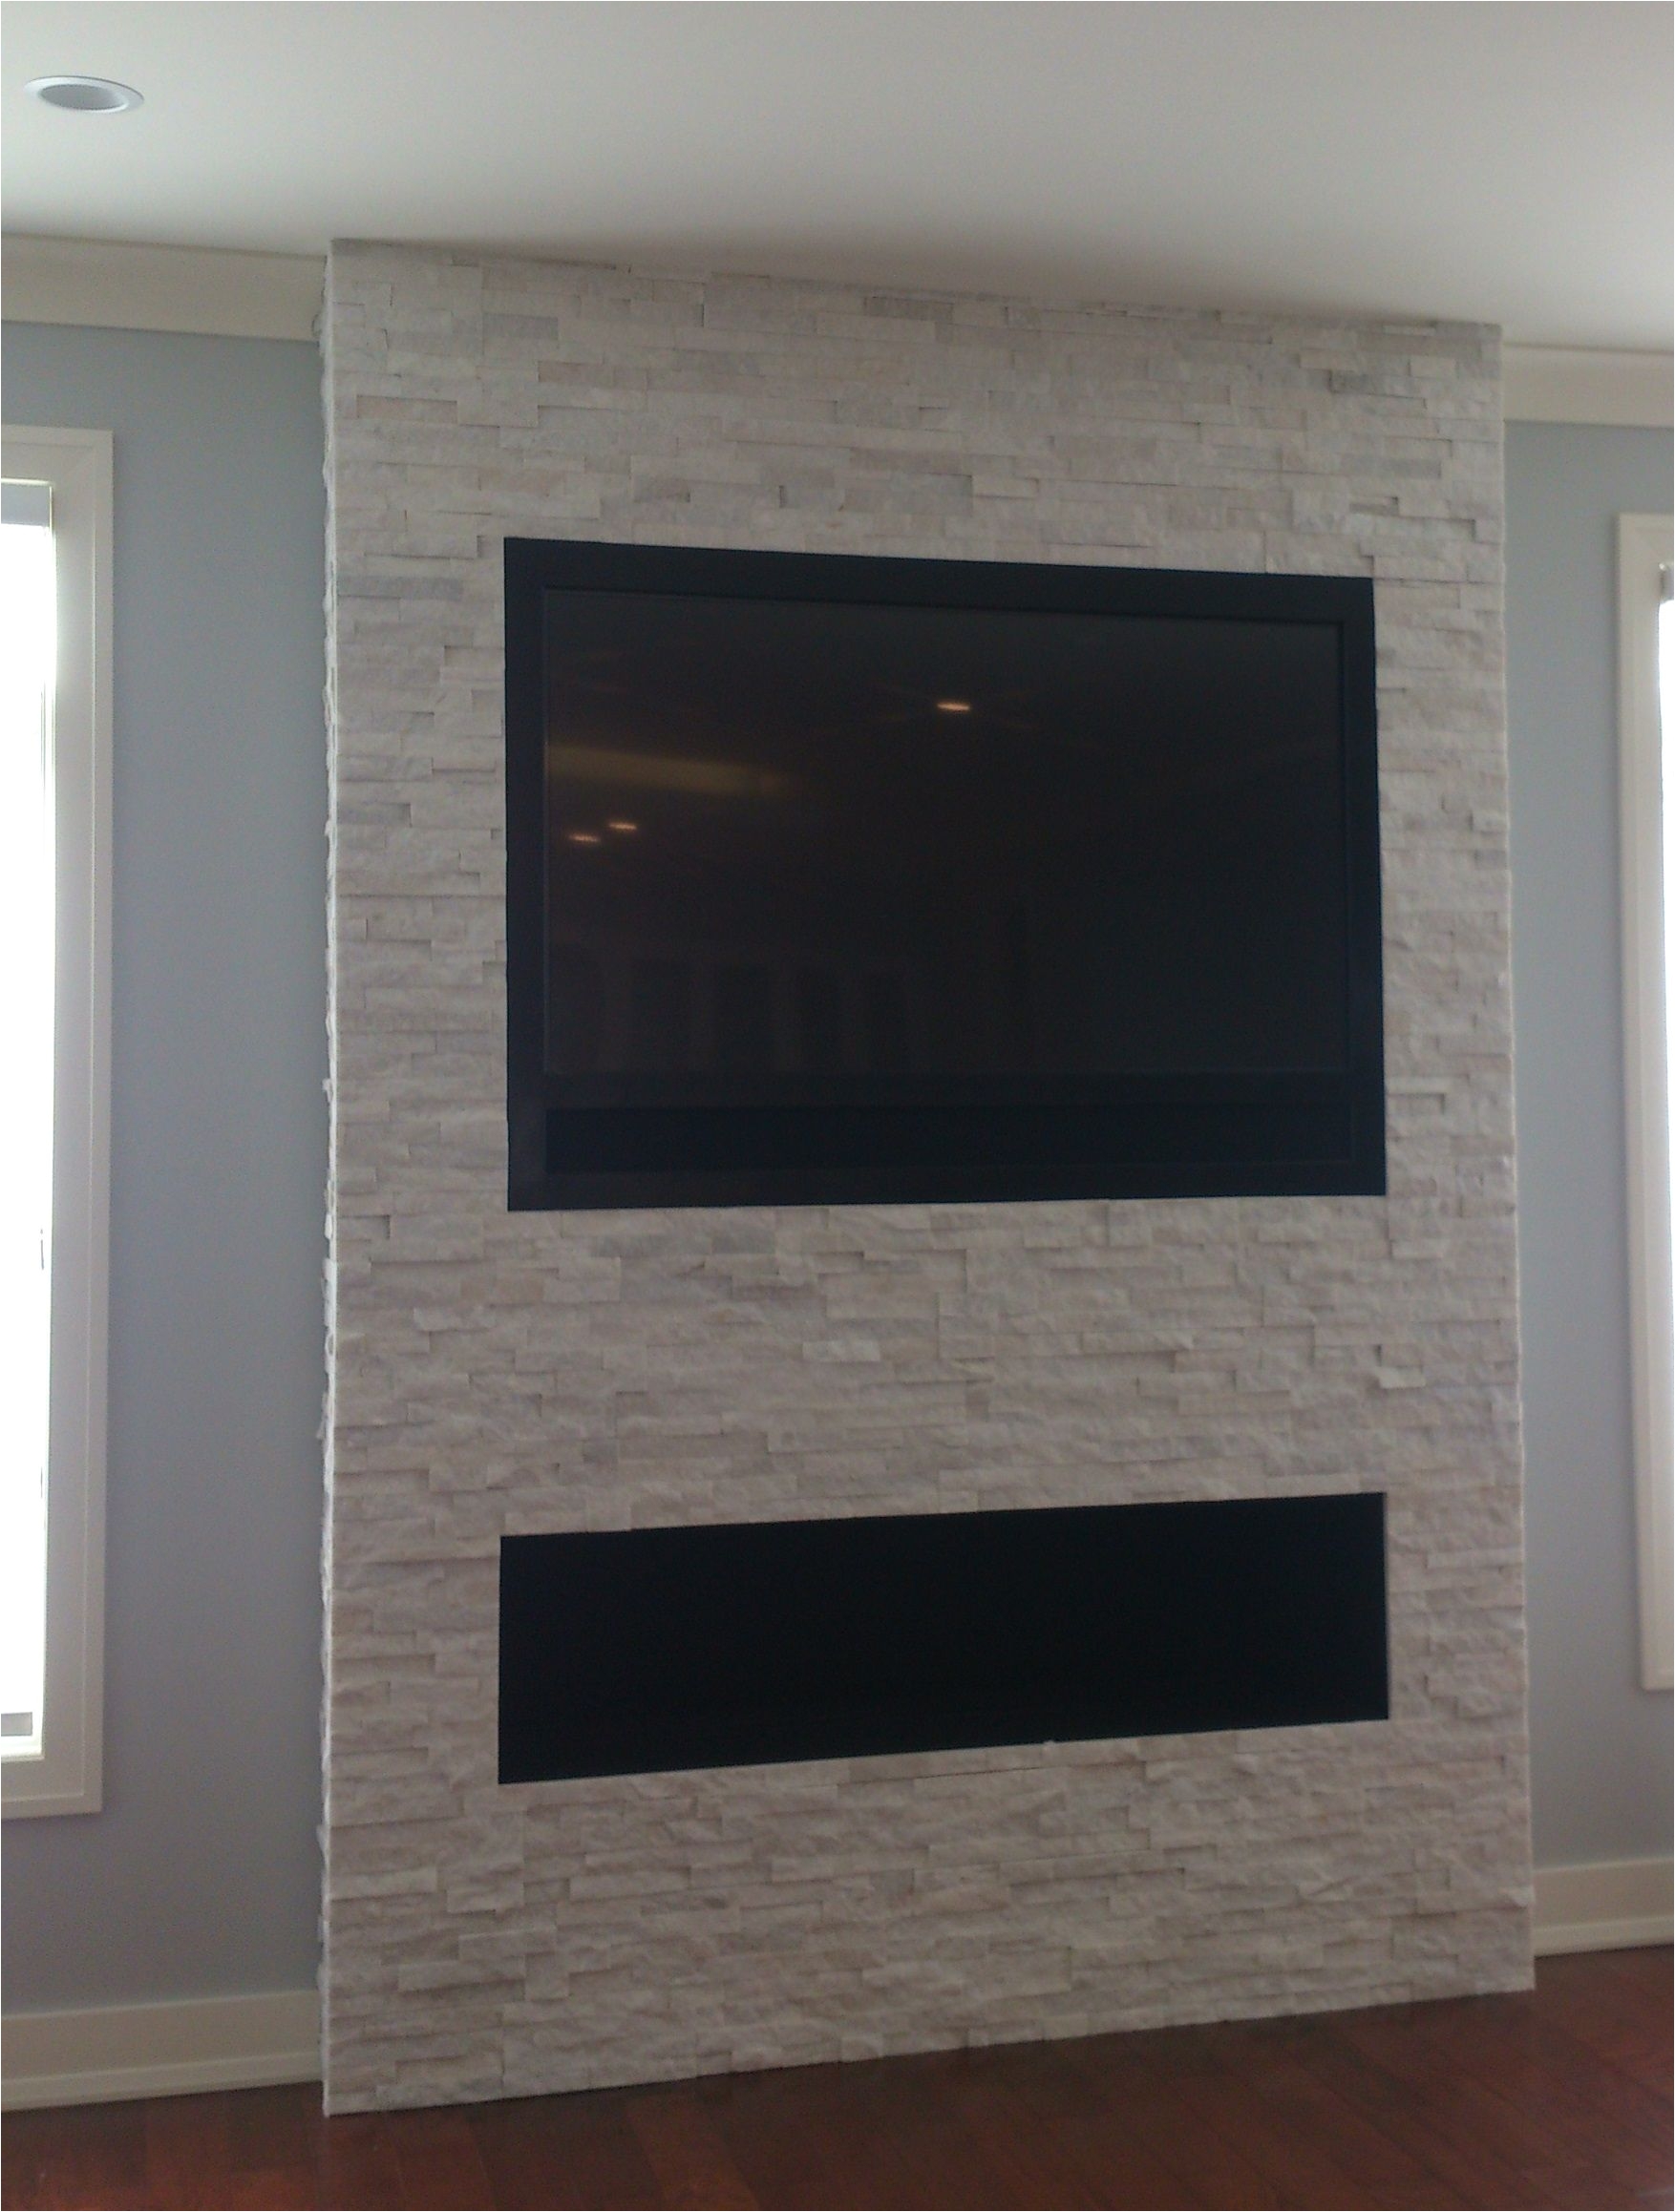 Quadra Fire Fireplace Best Of Gas Fireplace without Mantle Wondering How to Mount A Tv